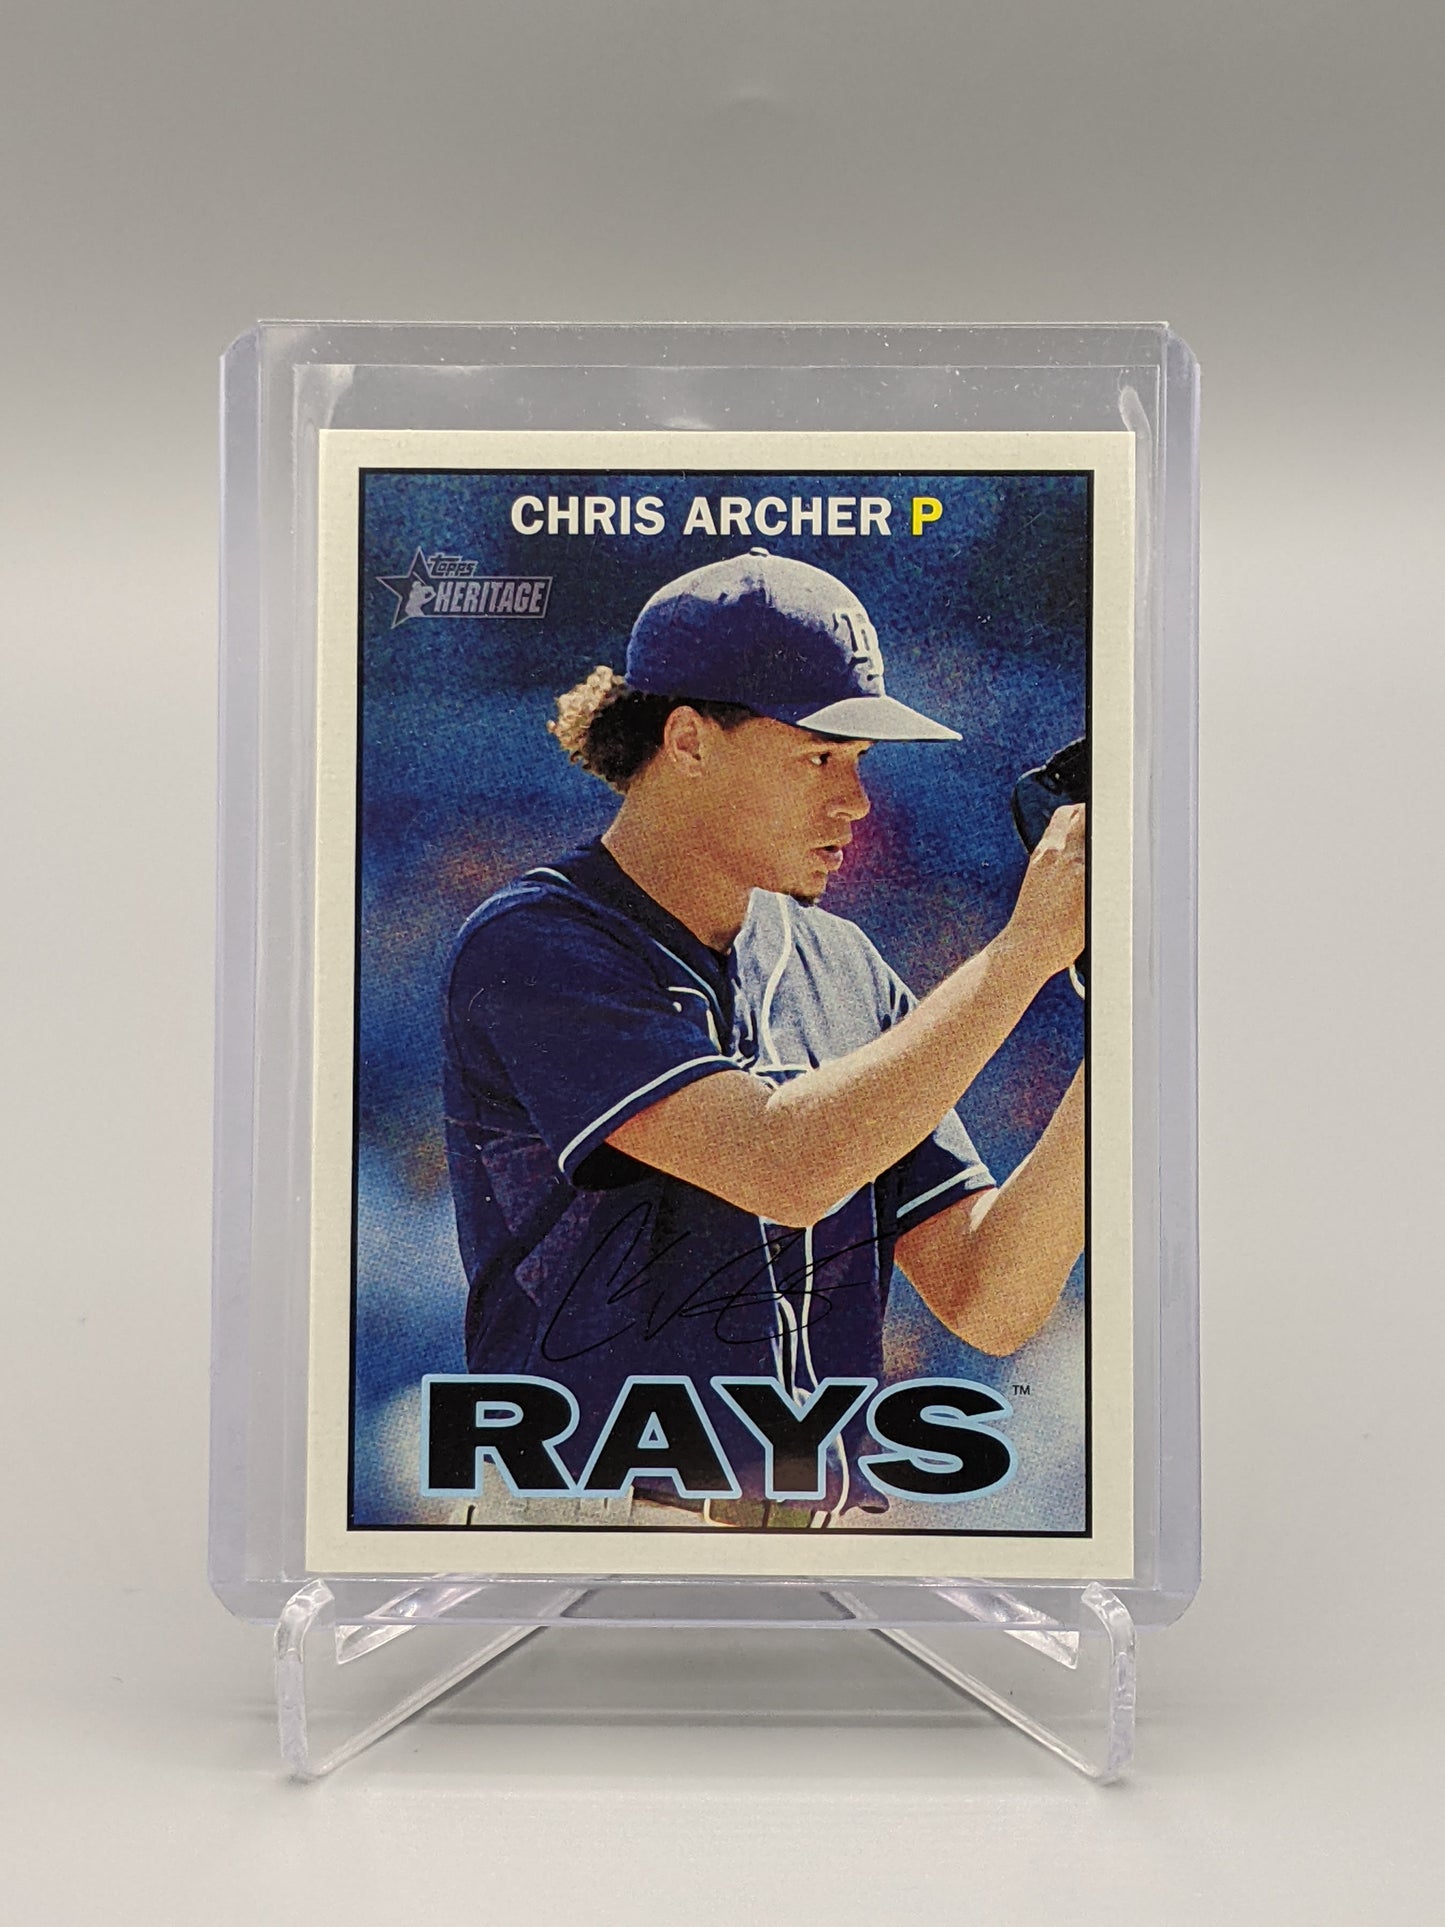 2016 Topps Heritage SP #435 Chris Archer Rays